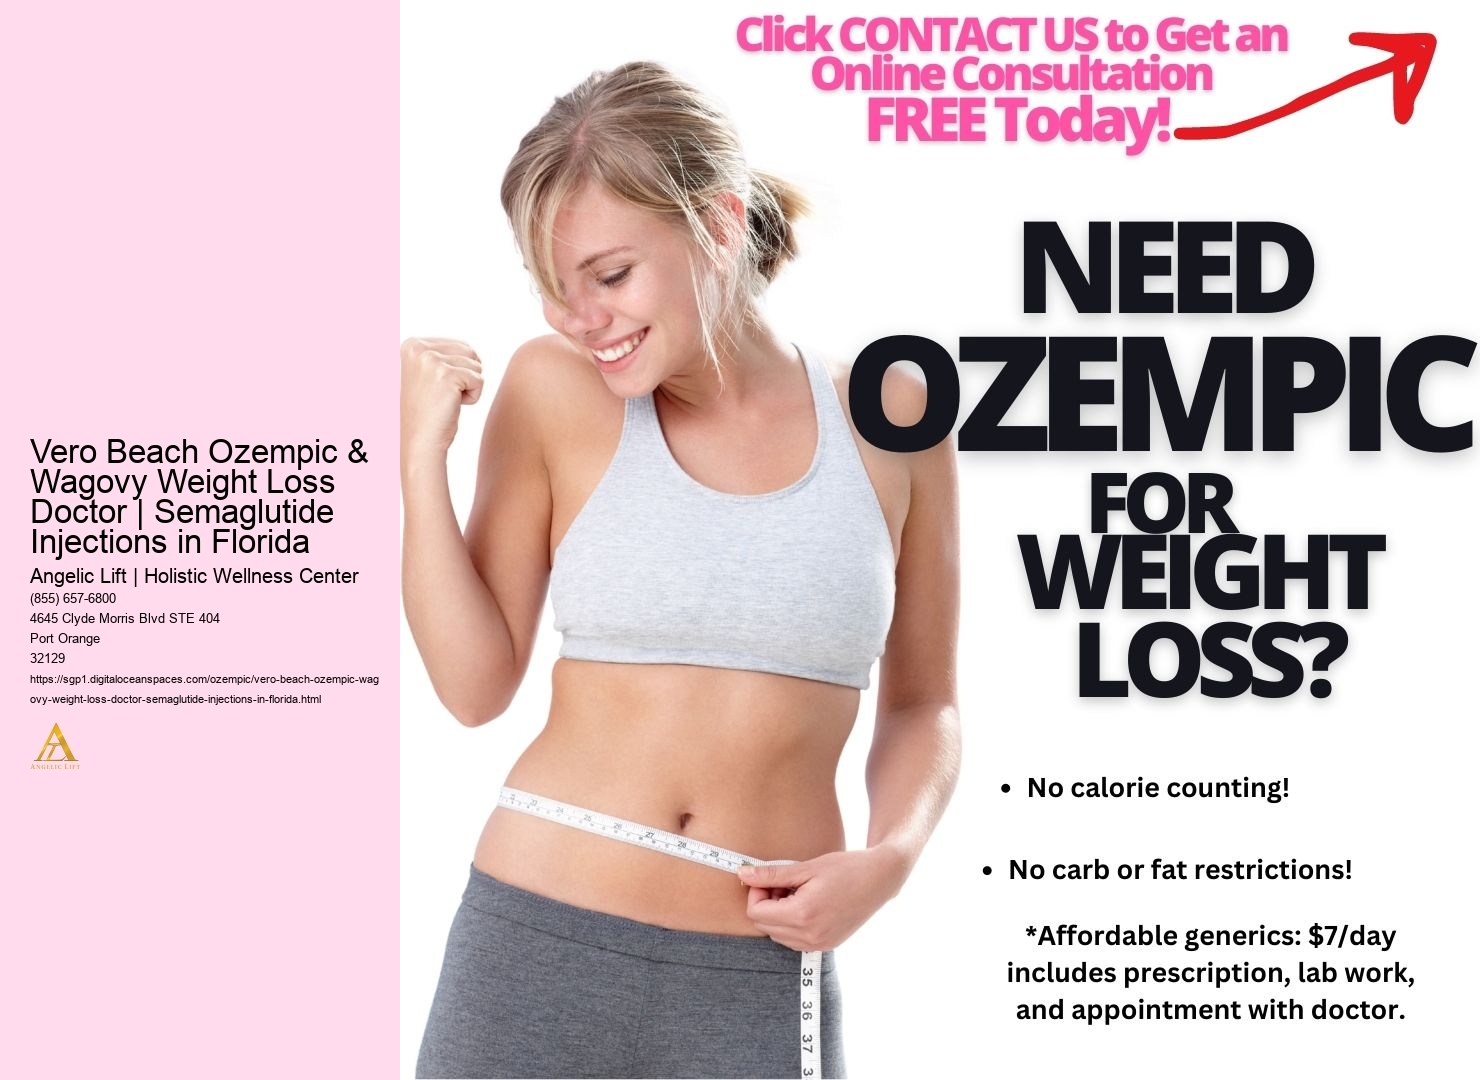 Vero Beach Ozempic & Wagovy Weight Loss Doctor | Semaglutide Injections in Florida